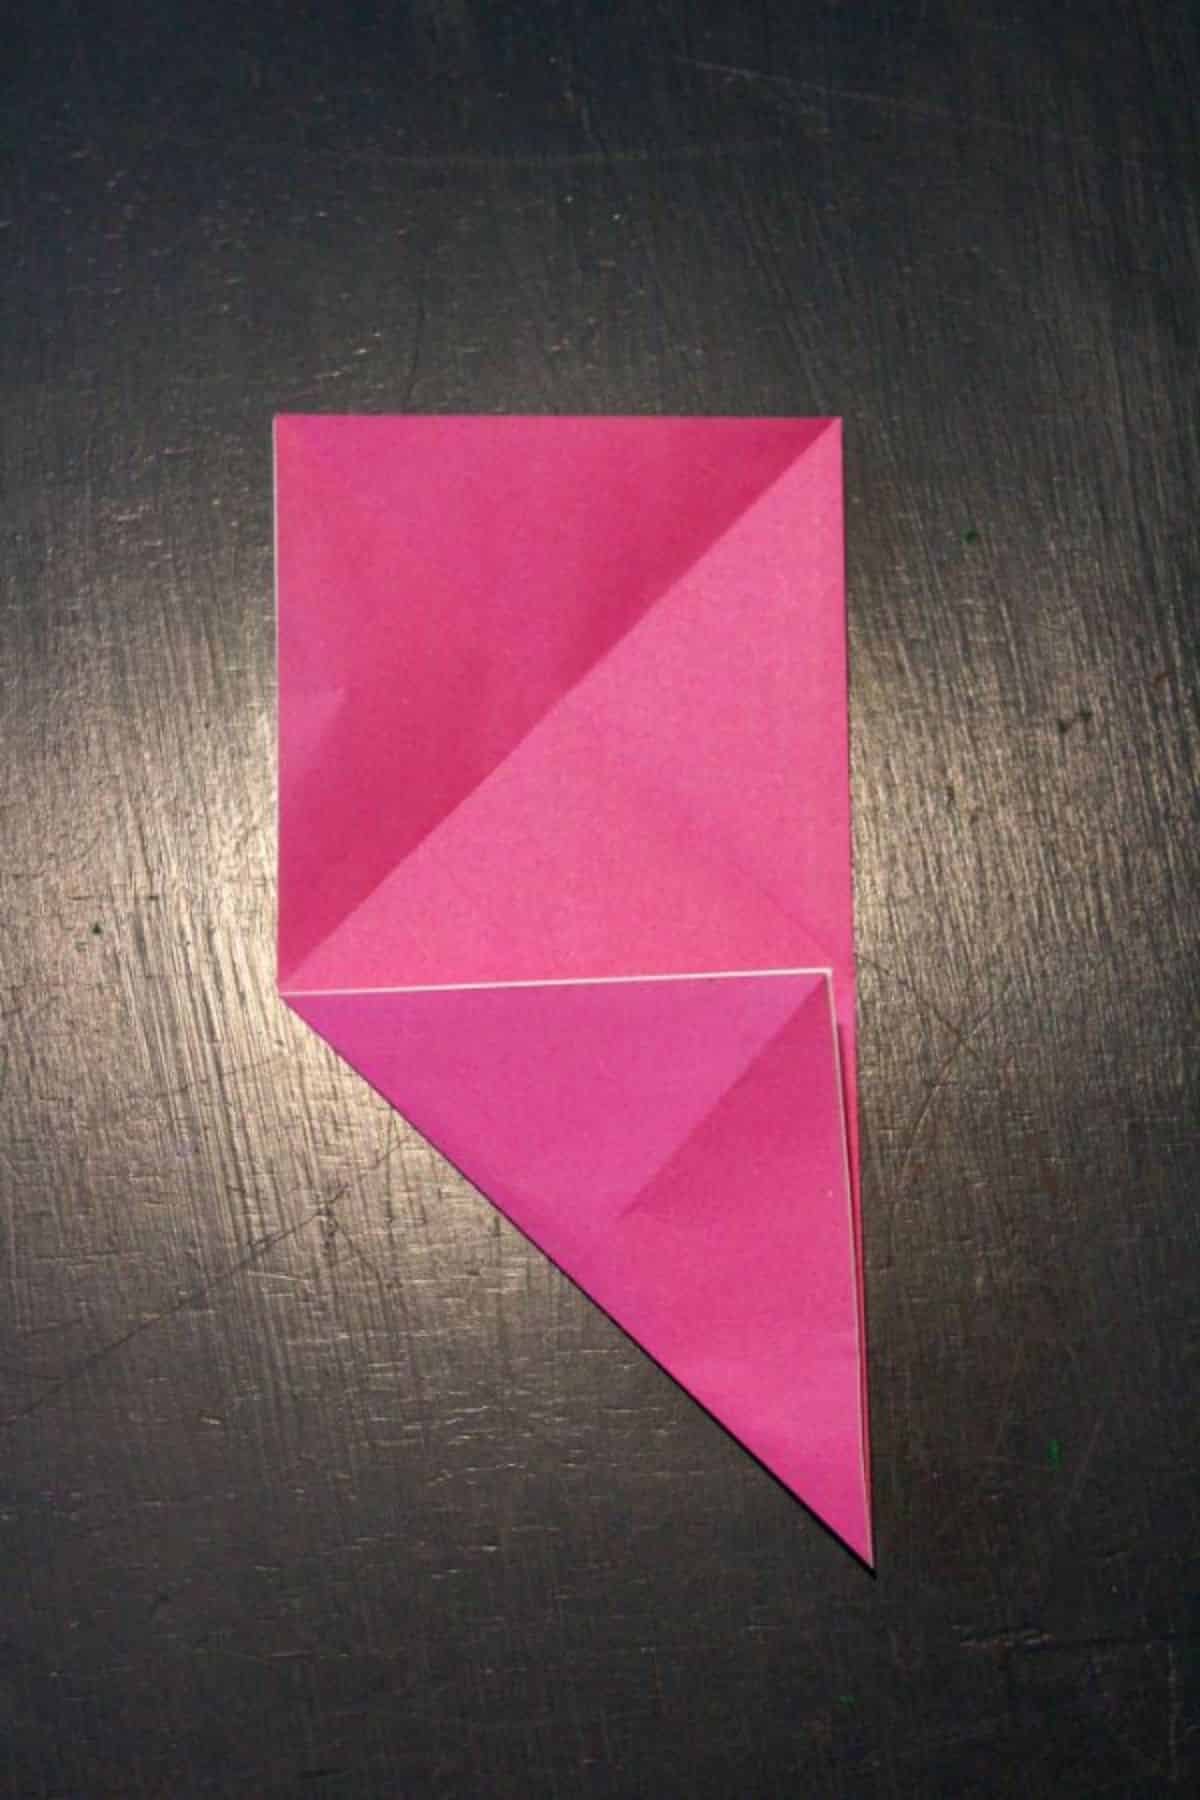 pink origami paper folded into diagonal on lower left corner on a black background.